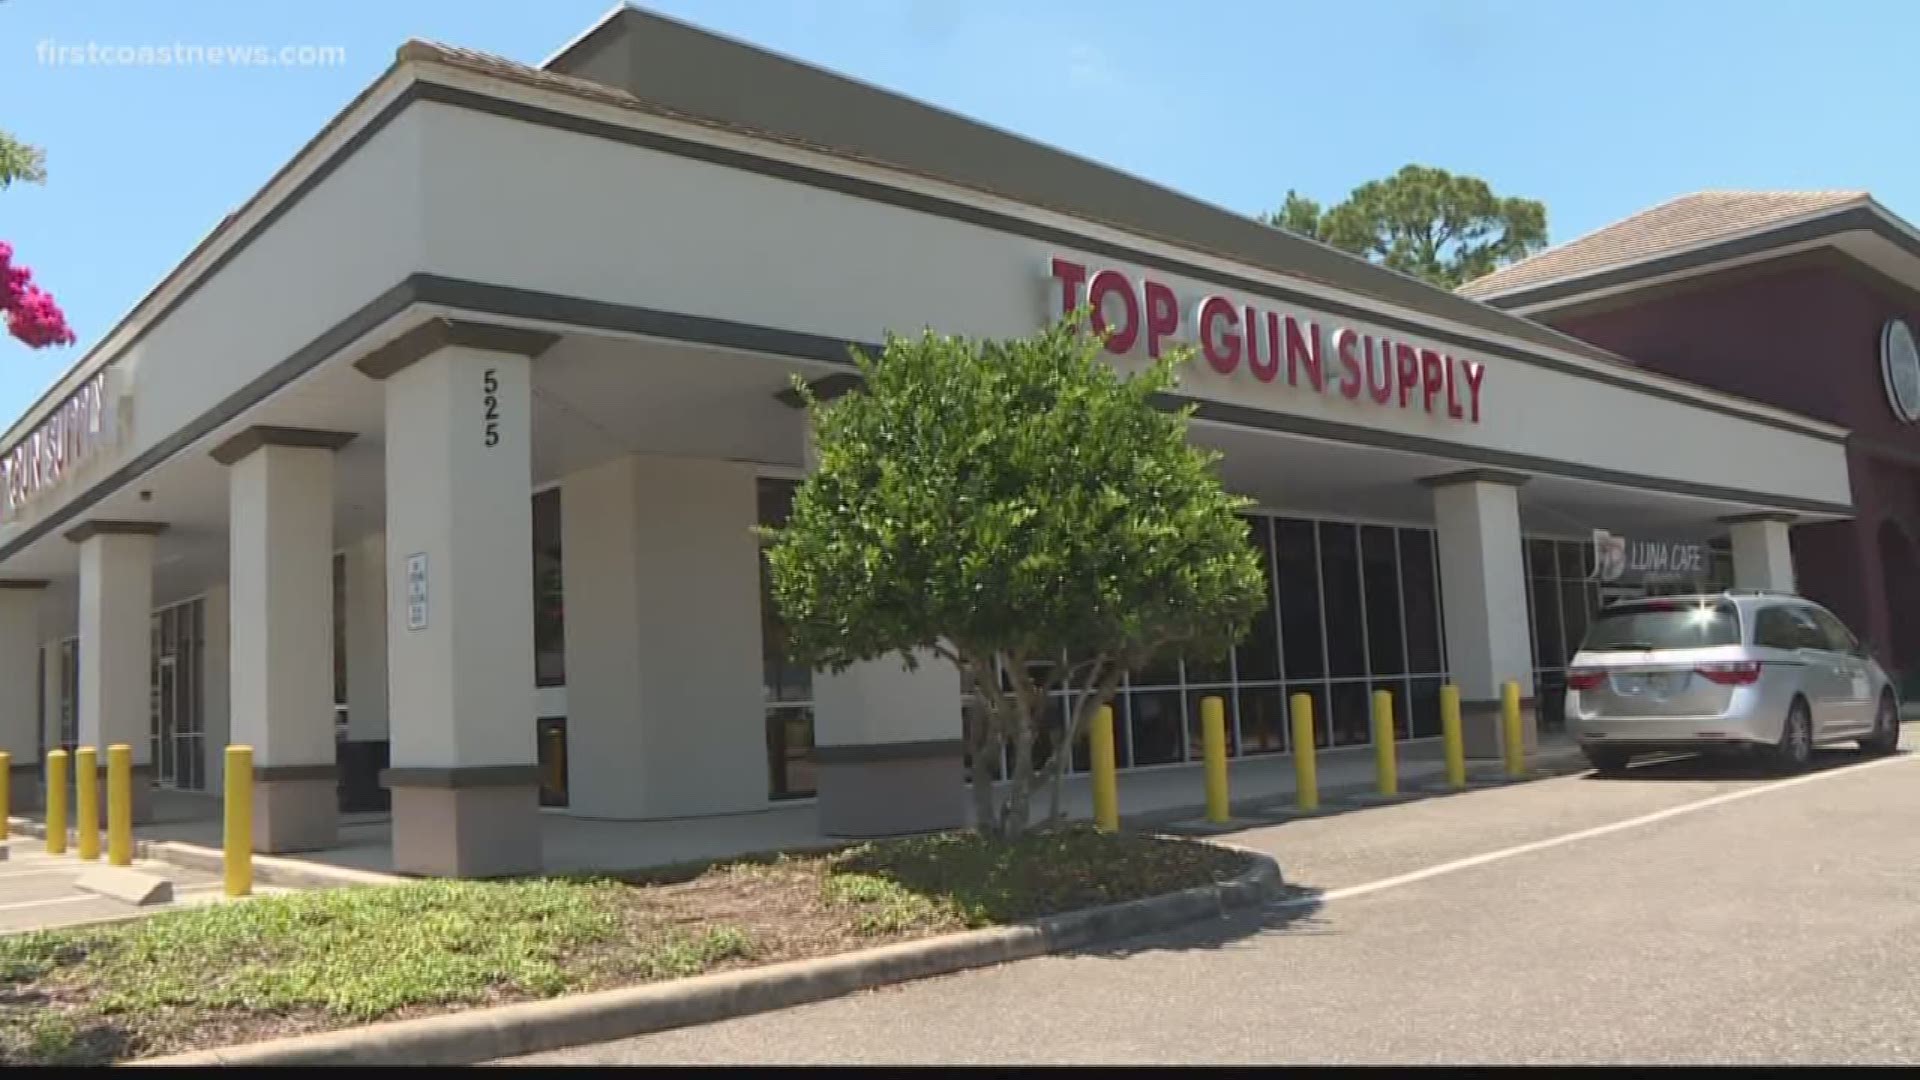 Ronald Salley Jr. fled on foot and threw an object, which turned out to be a stolen firearm from the gun store robbery, the sheriff's office said.